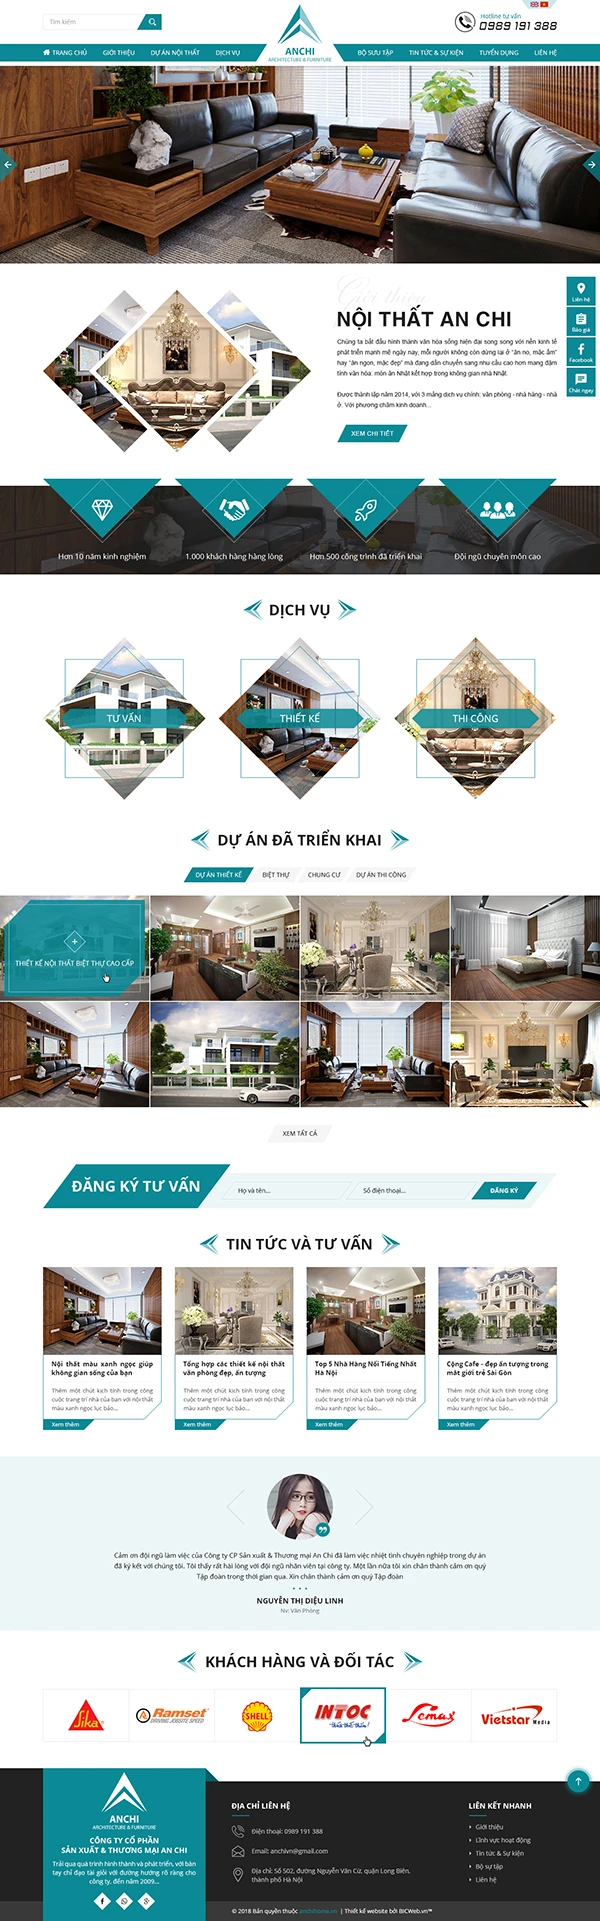 Thiết kế website nội thất - AnchiHome